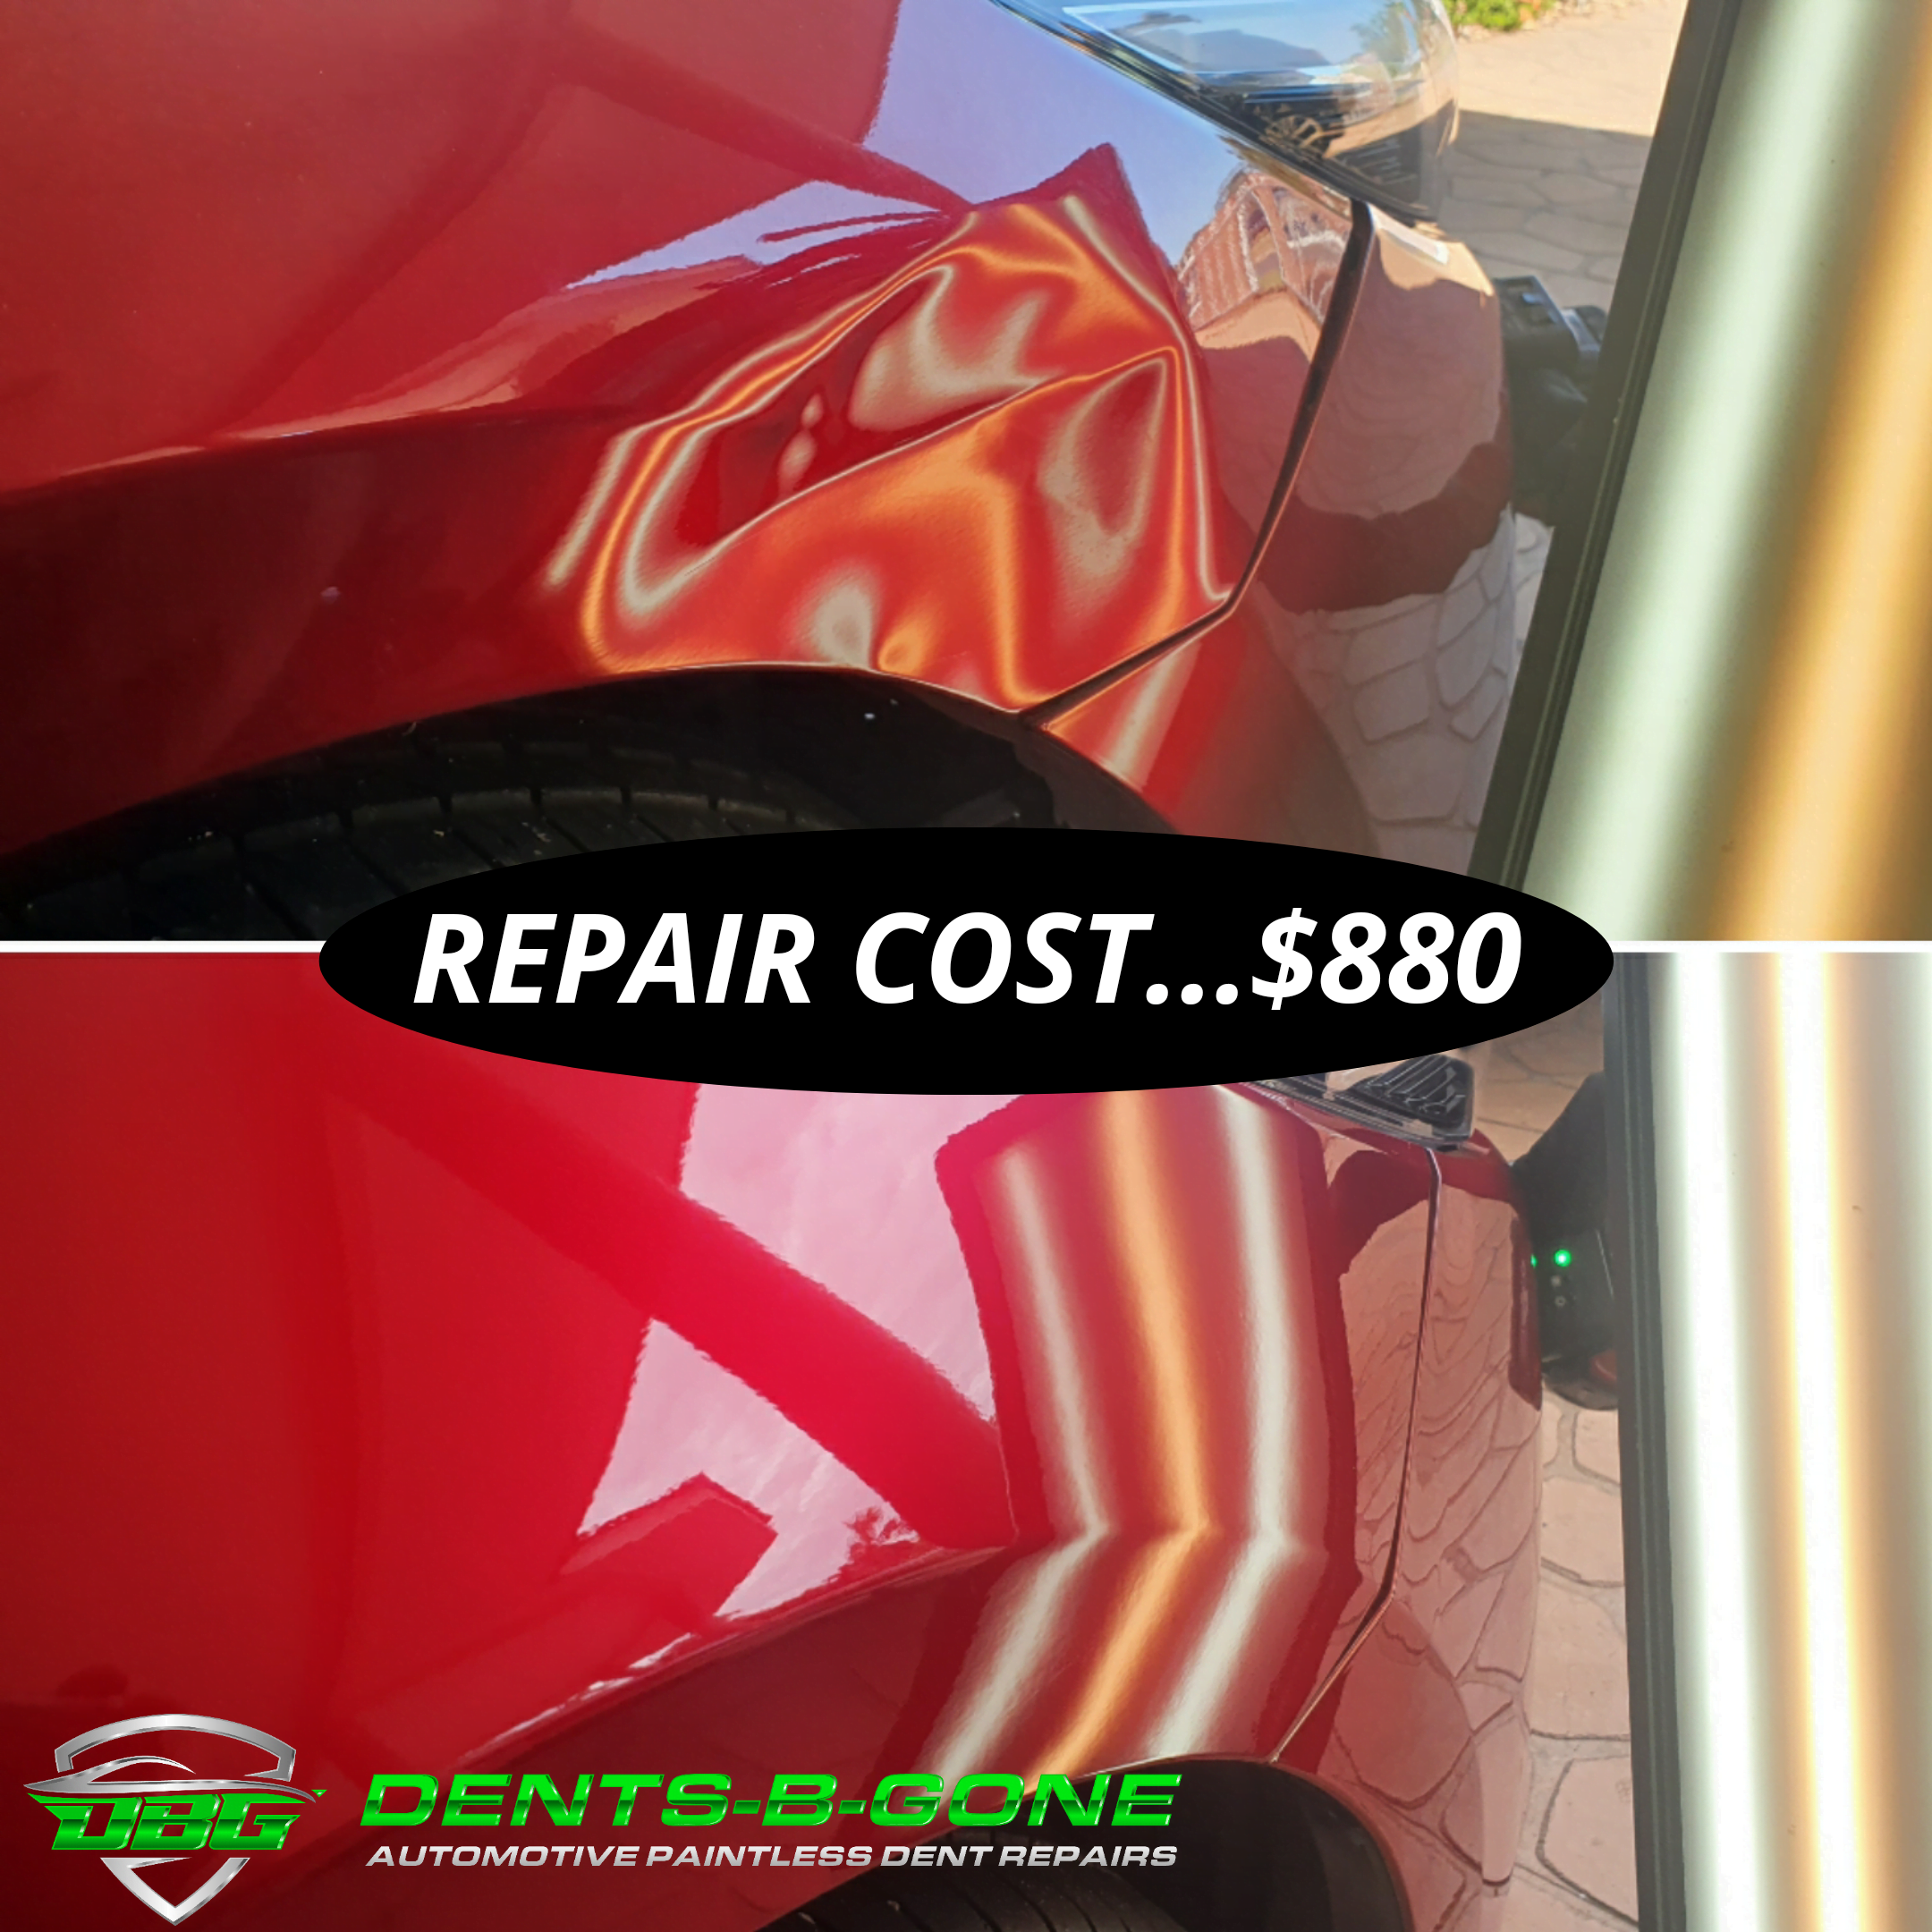  More About Paintless Dent Repair Pricing Guide  thumbnail